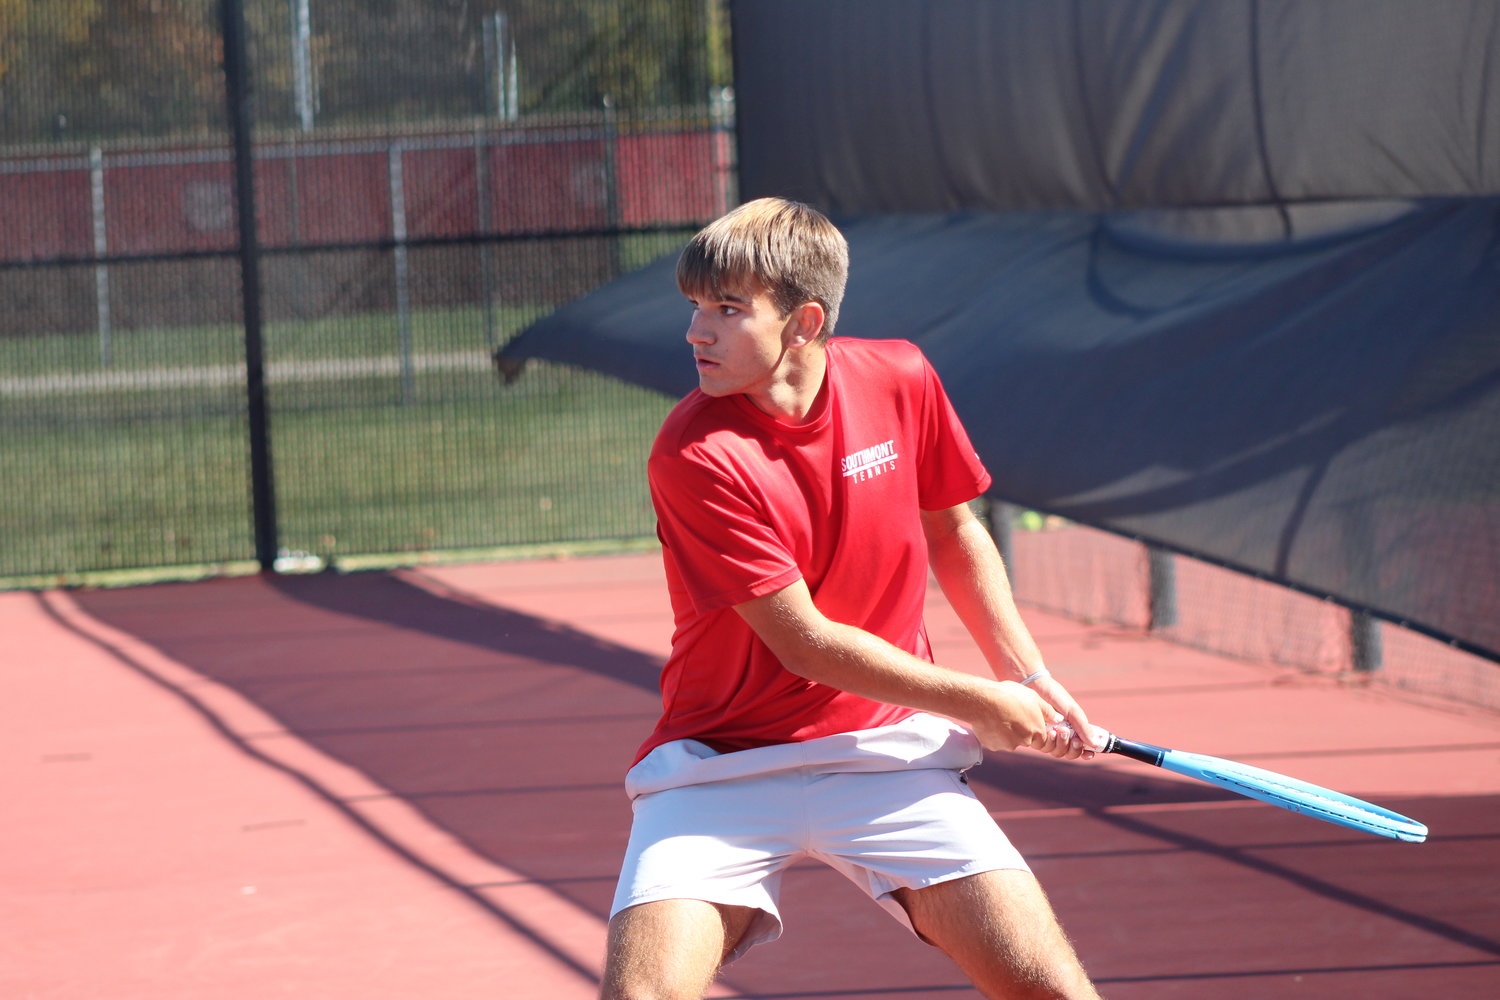 Southmont’s Adam Cox undefeated senior season continued on Saturday as he  won the Regional title and qualified for the IHSAA State Quarter-Finals on Friday afternoon at Park Tudor.